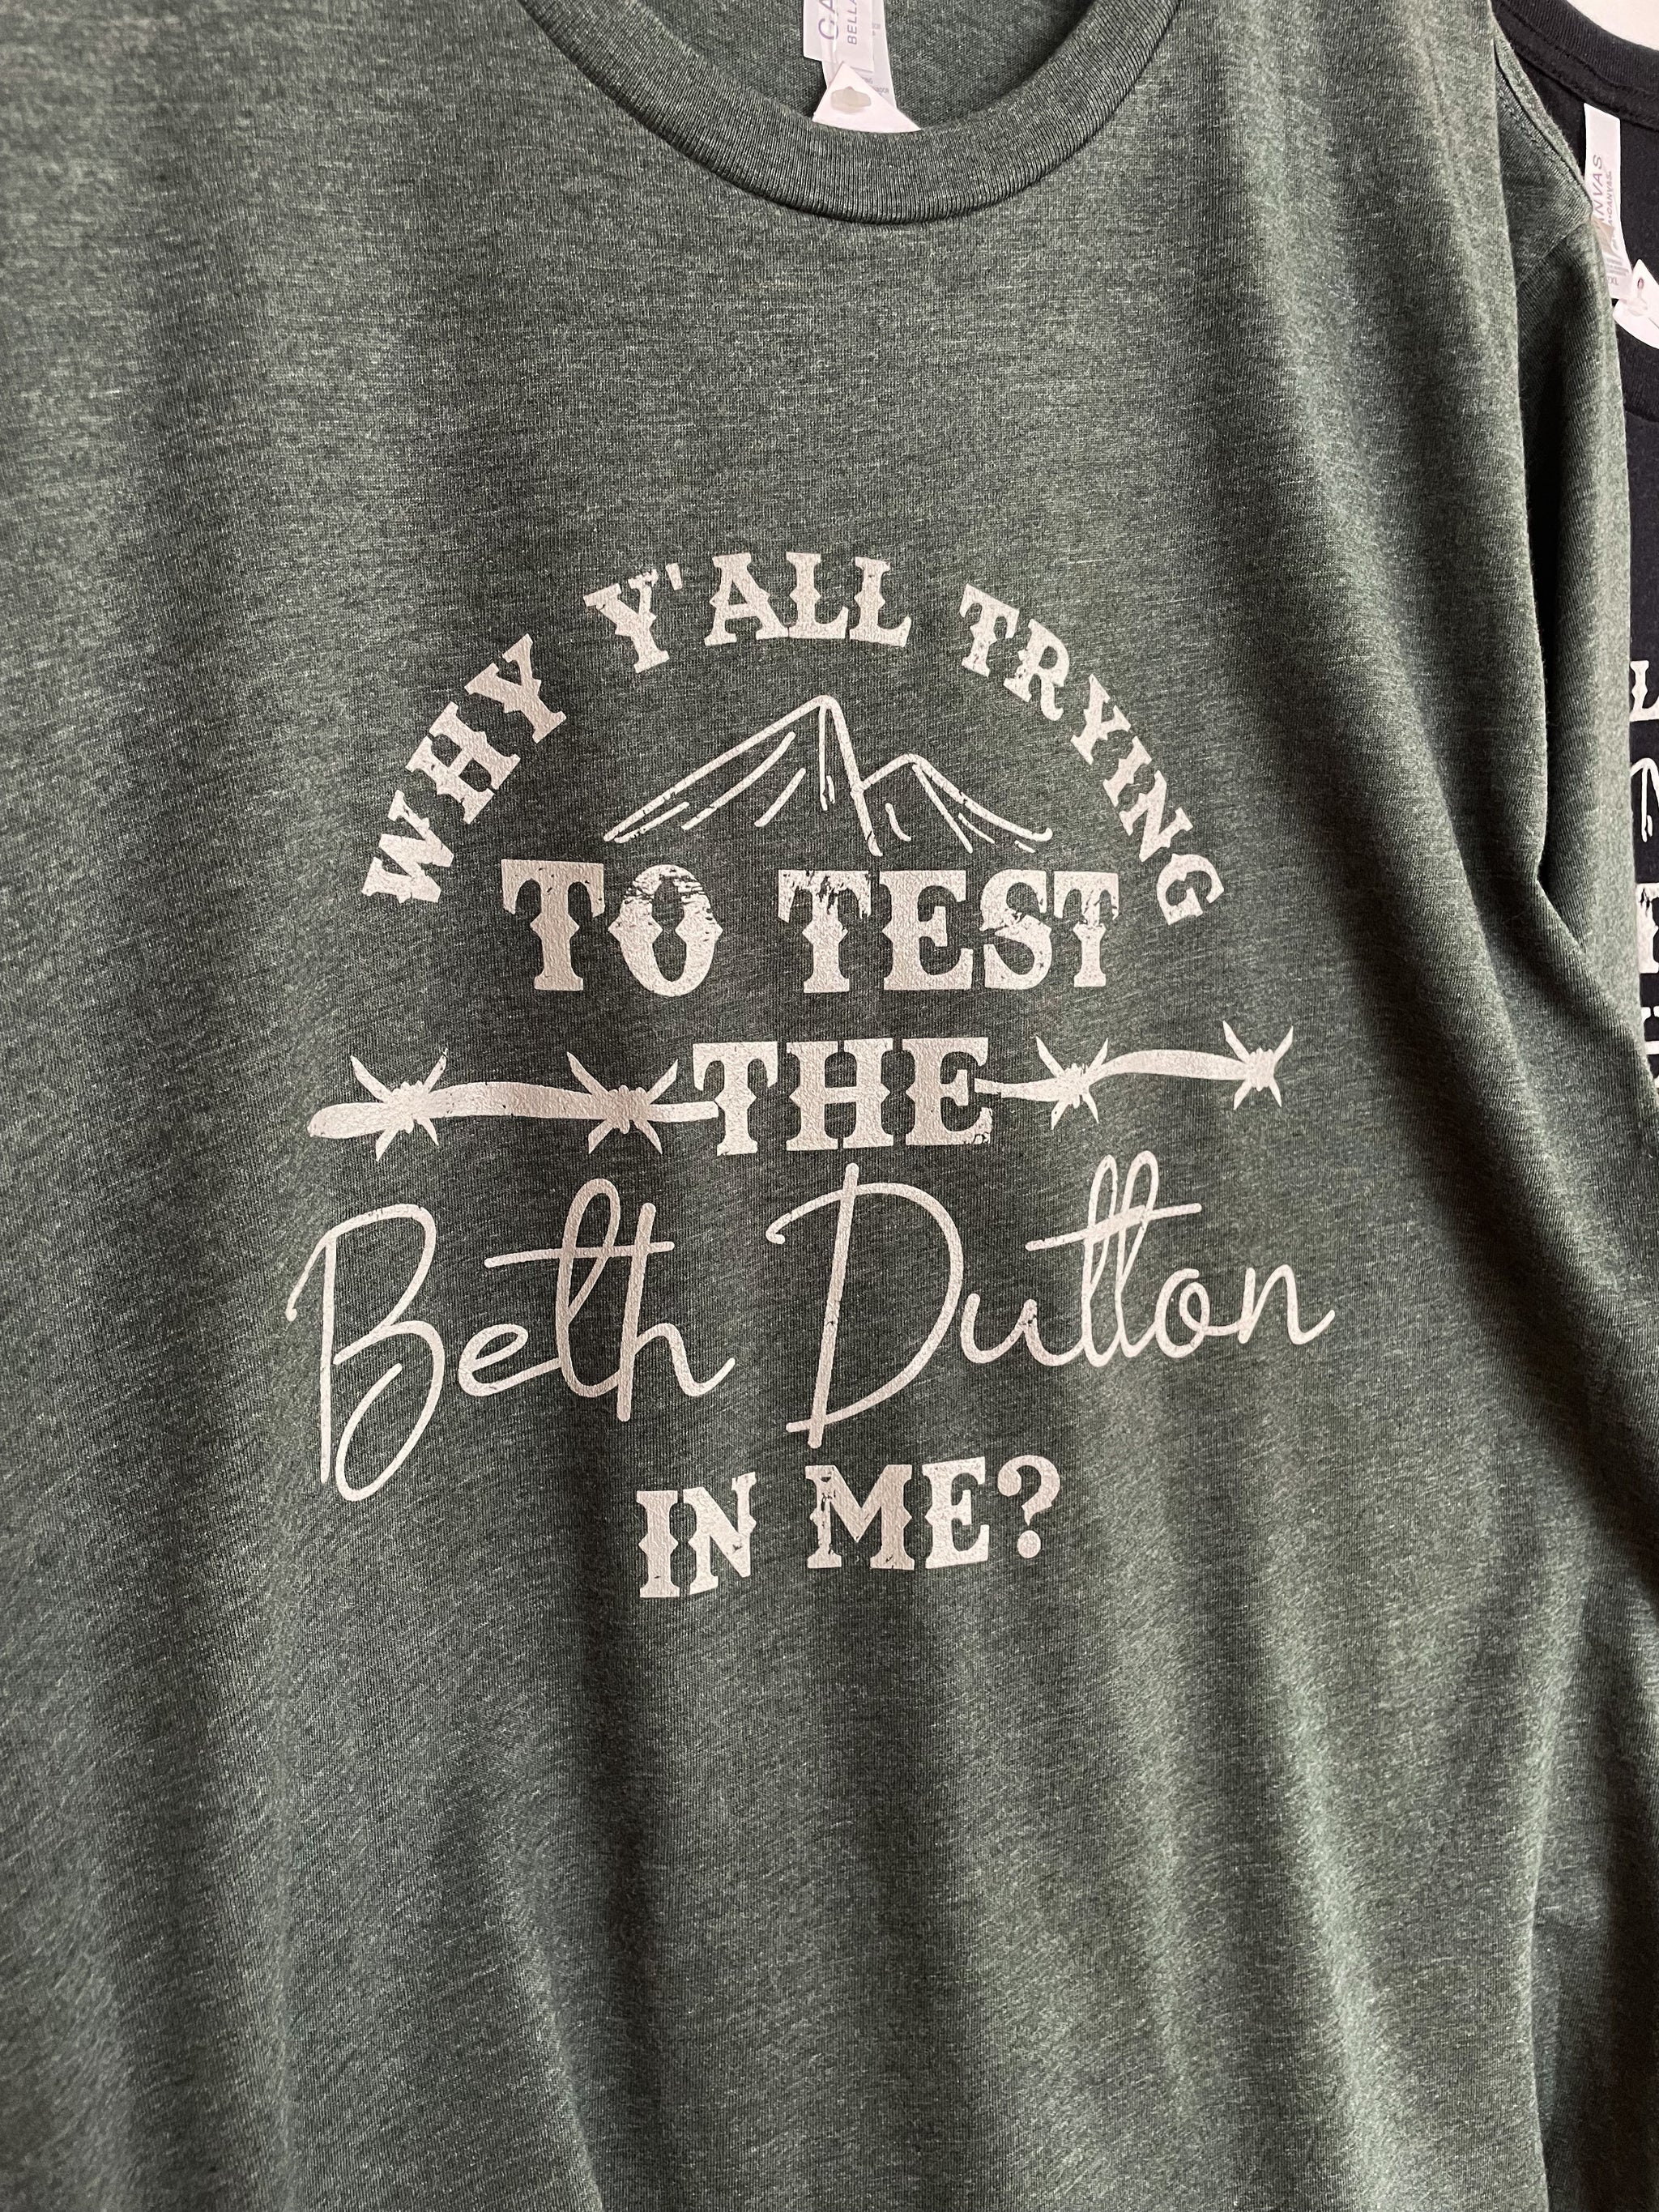 "Test The Beth Dutton In Me" Graphic Tee Plus Size